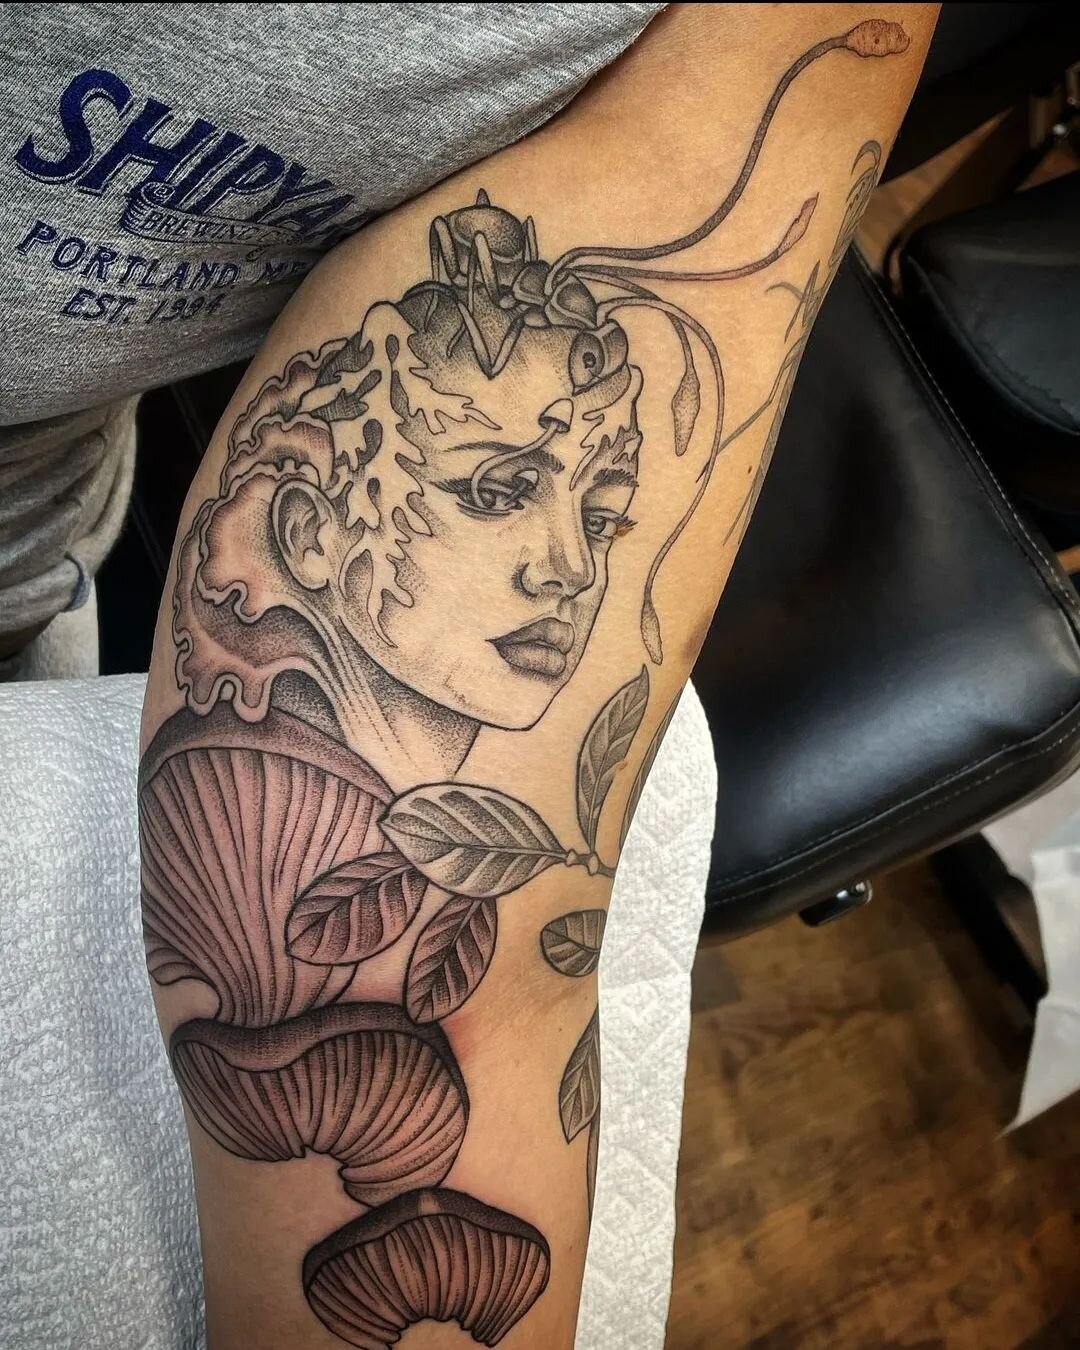 This underworld goddess work in process from Charity is ✨so so so✨ dope. We are obsessed!

Charity would love to do more designs like this! Do you have an idea that includes faces, fungi and dash of surrealism? Send them Charity's way!